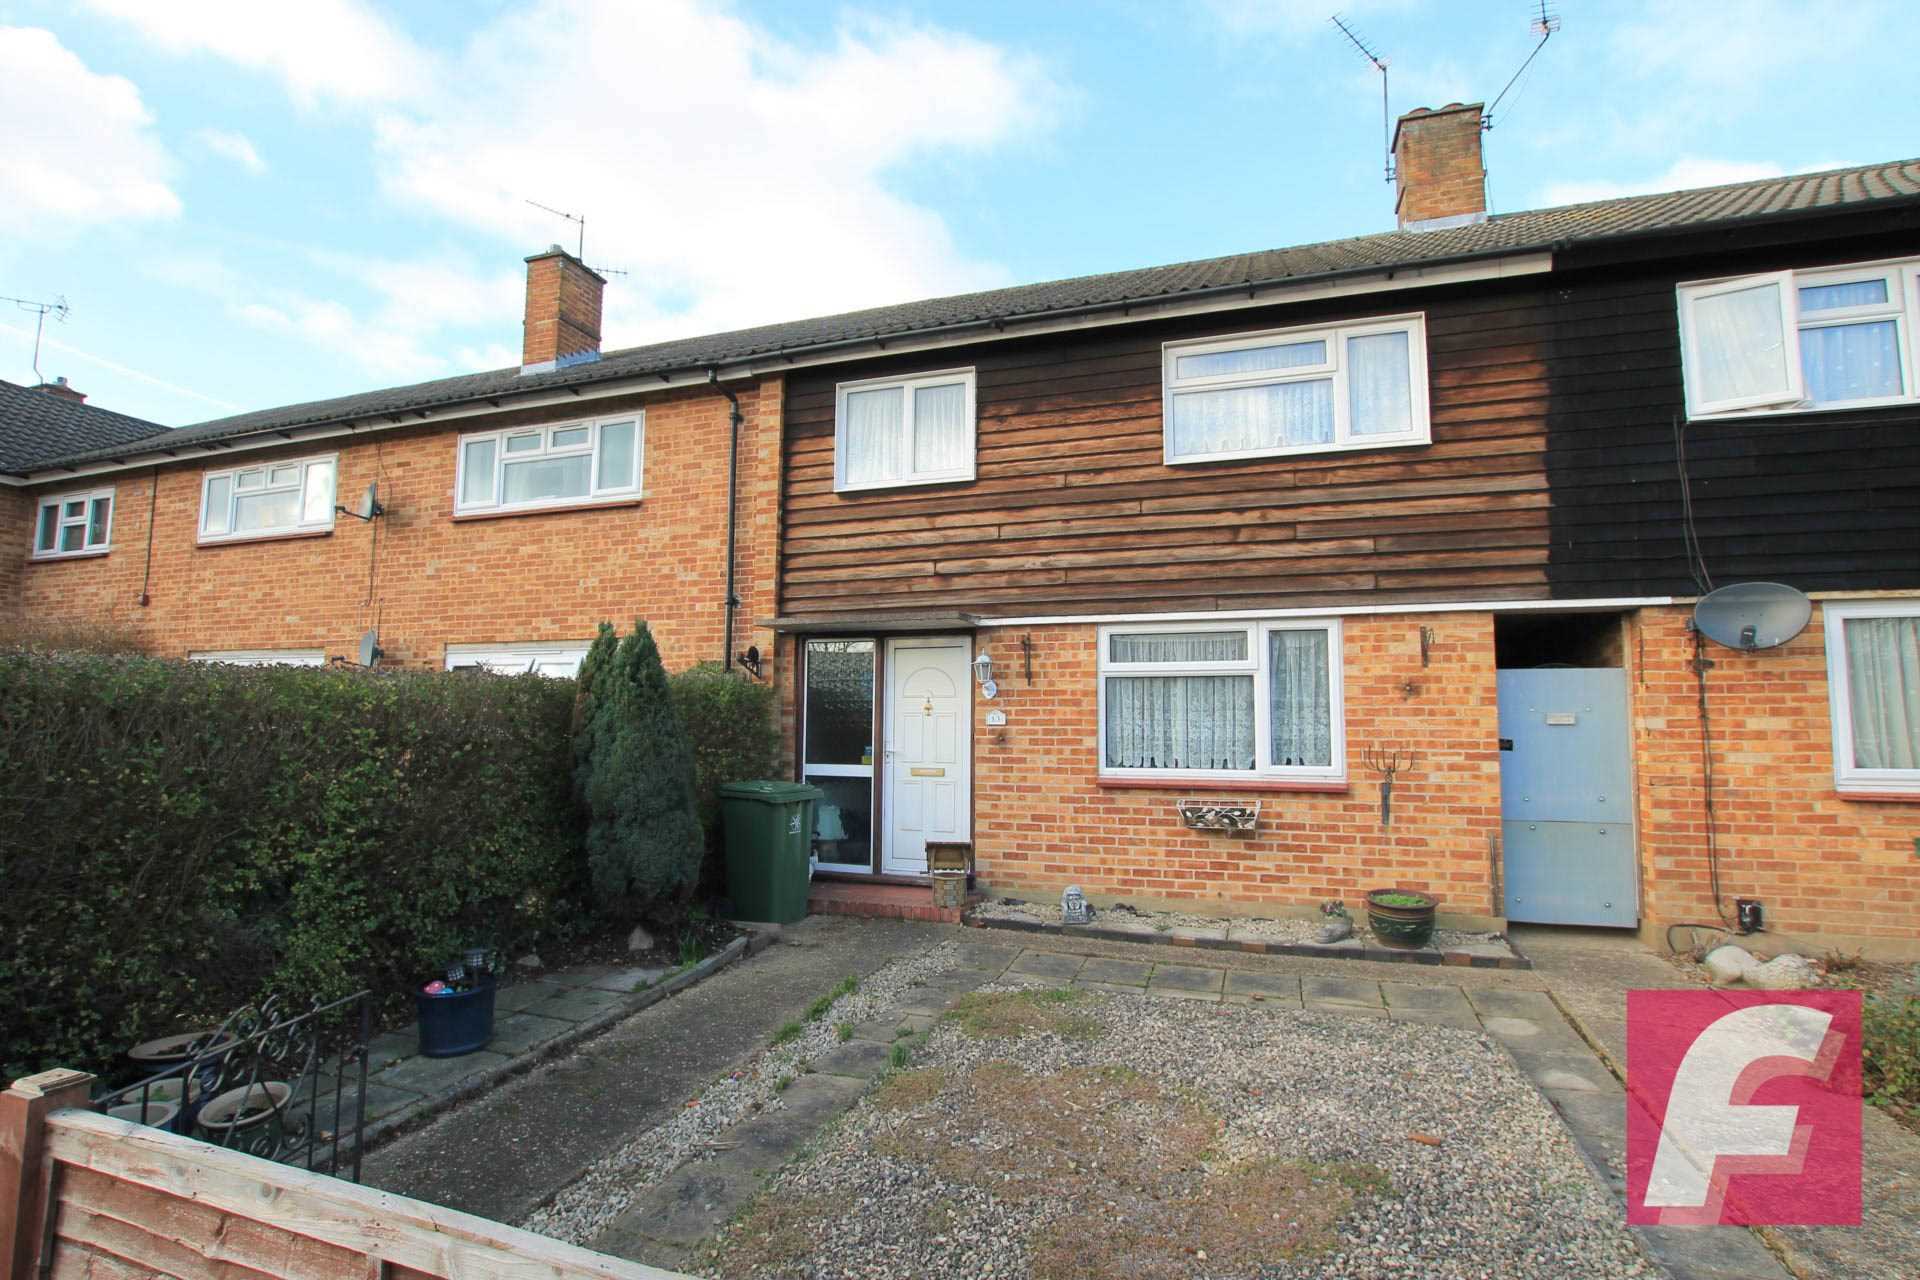 3 bed Mid Terraced House for rent in Watford. From Fairfield Estate Agents - Watford Branch